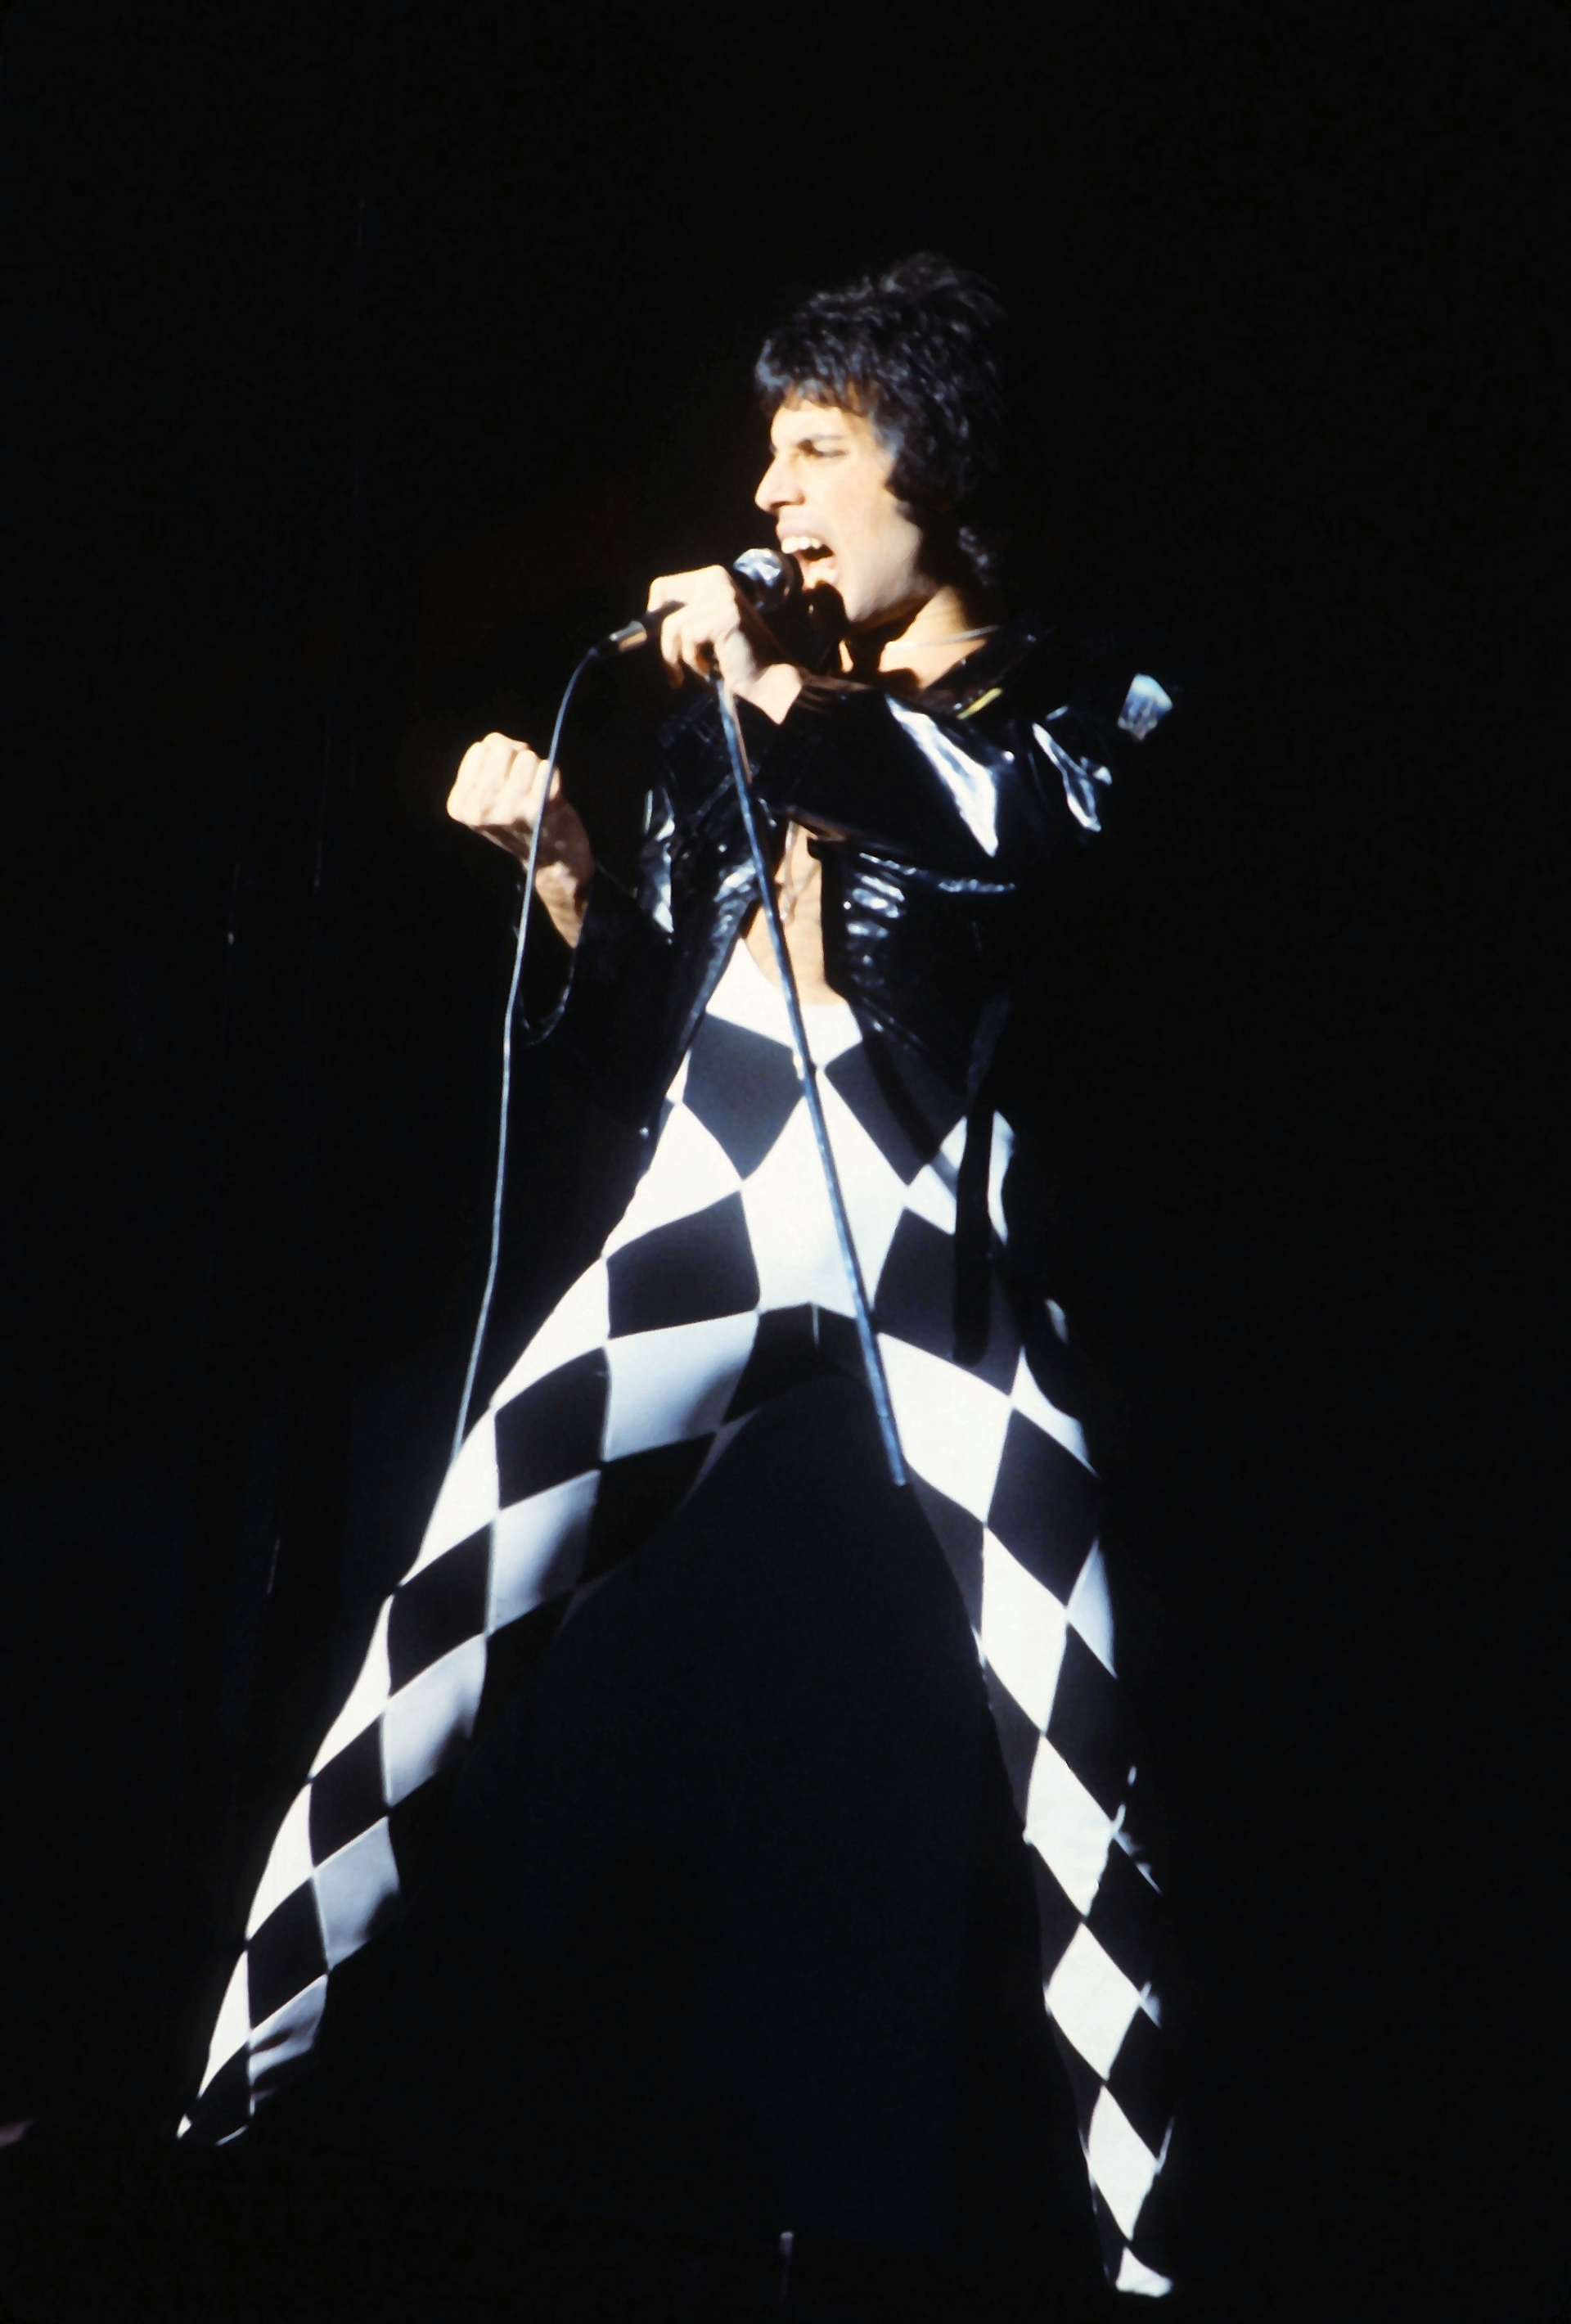 An image of the singer Freddie Mercury on stage. He is wearing a black and white Harlequin-style catsuit and a leather jacket.